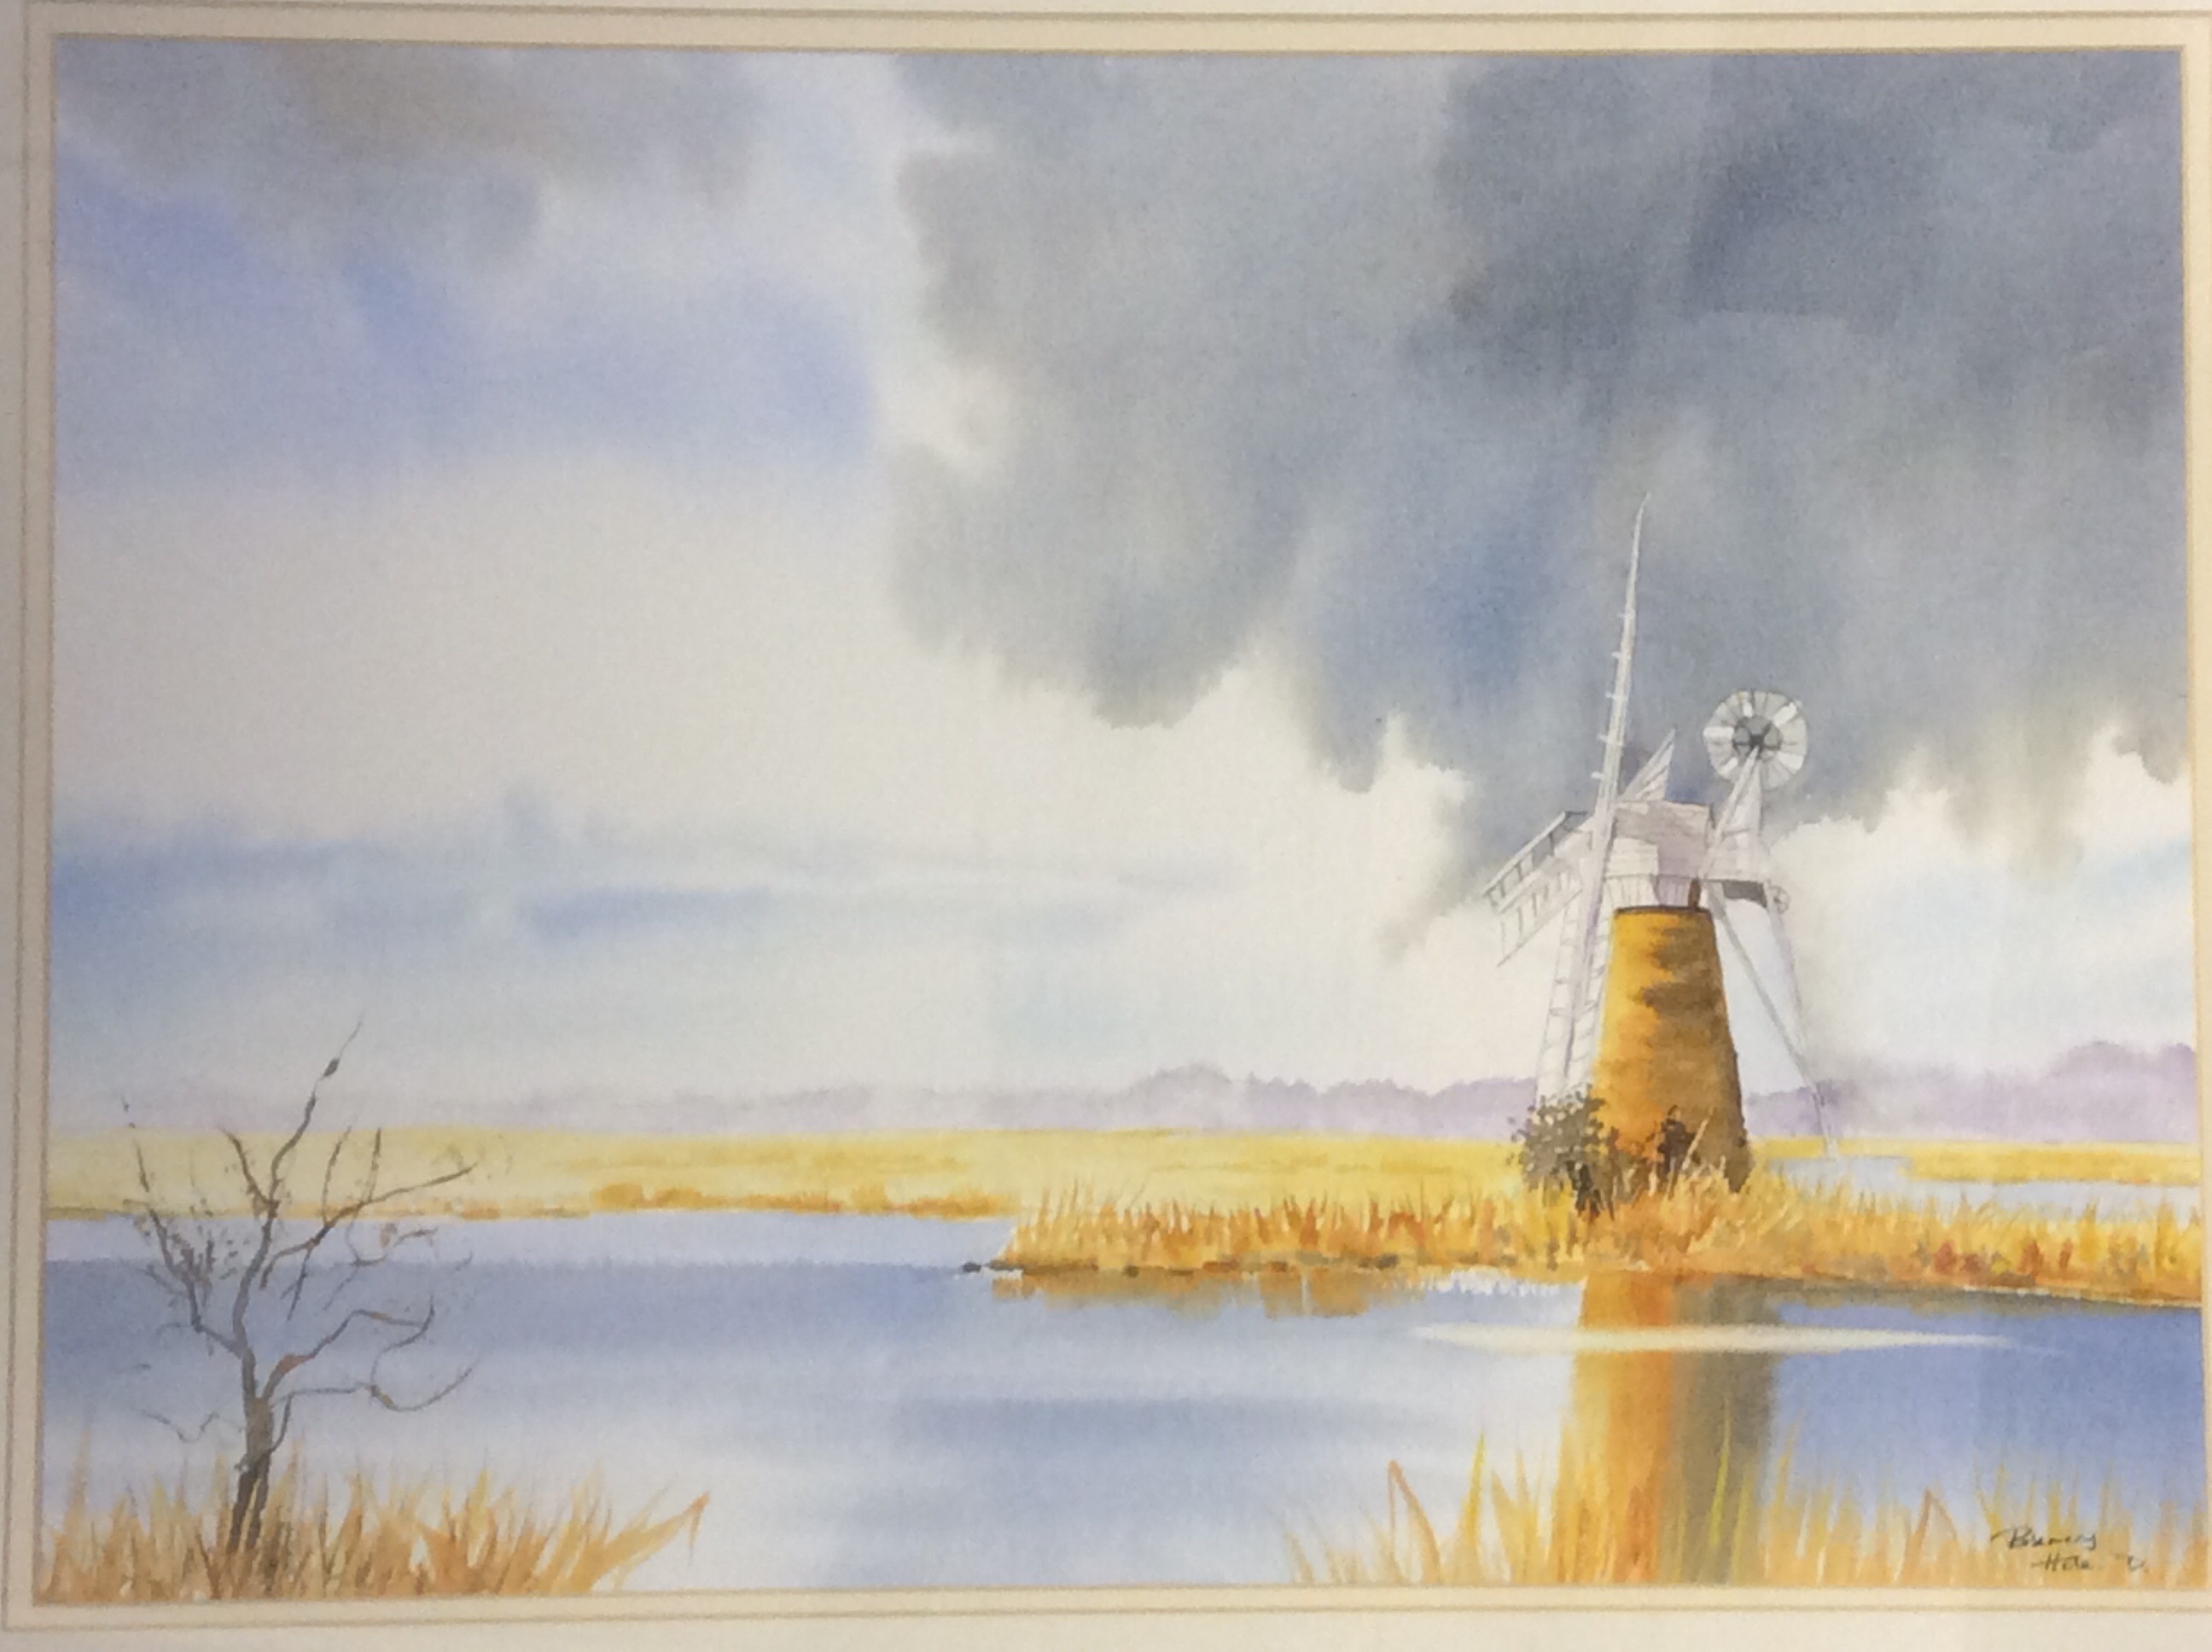 ROSEMARY HALE. Framed, glazed, signed watercolour depicting autumnal landscape with windmill, 36cm x